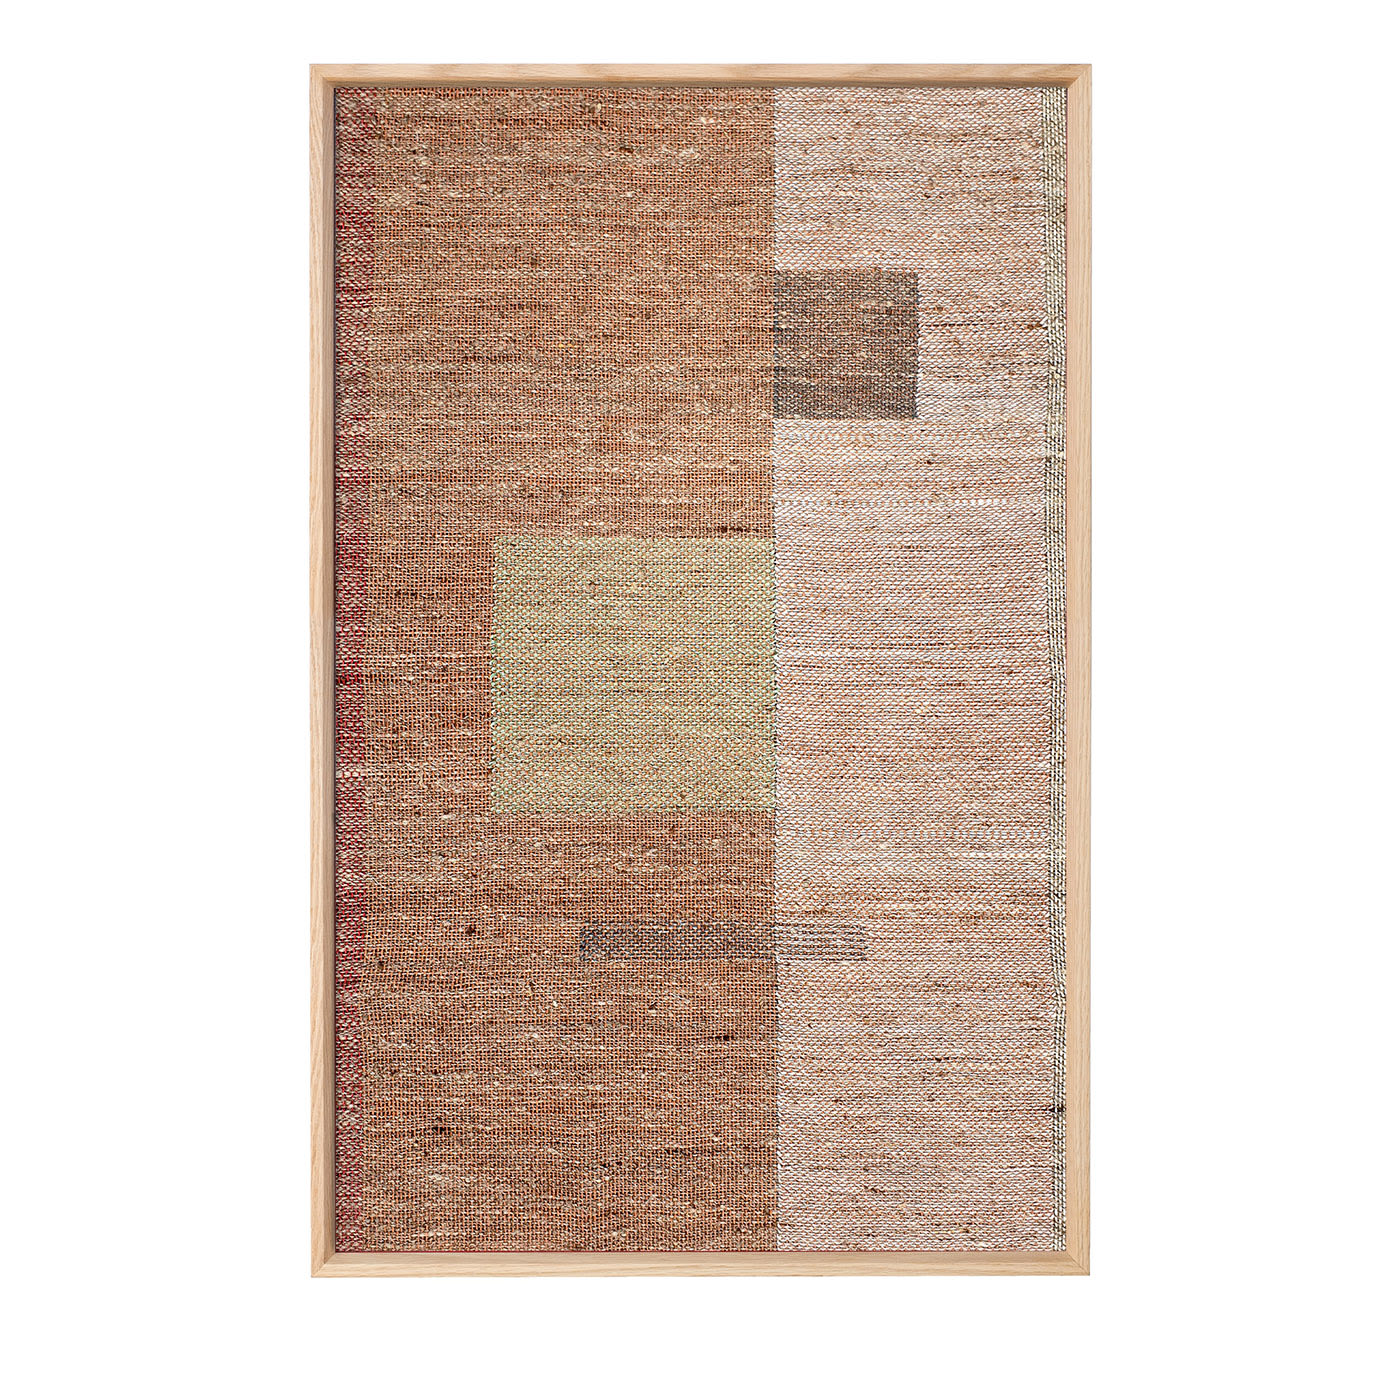 Opus I Hand Woven Tapestry - Costantini Atelier